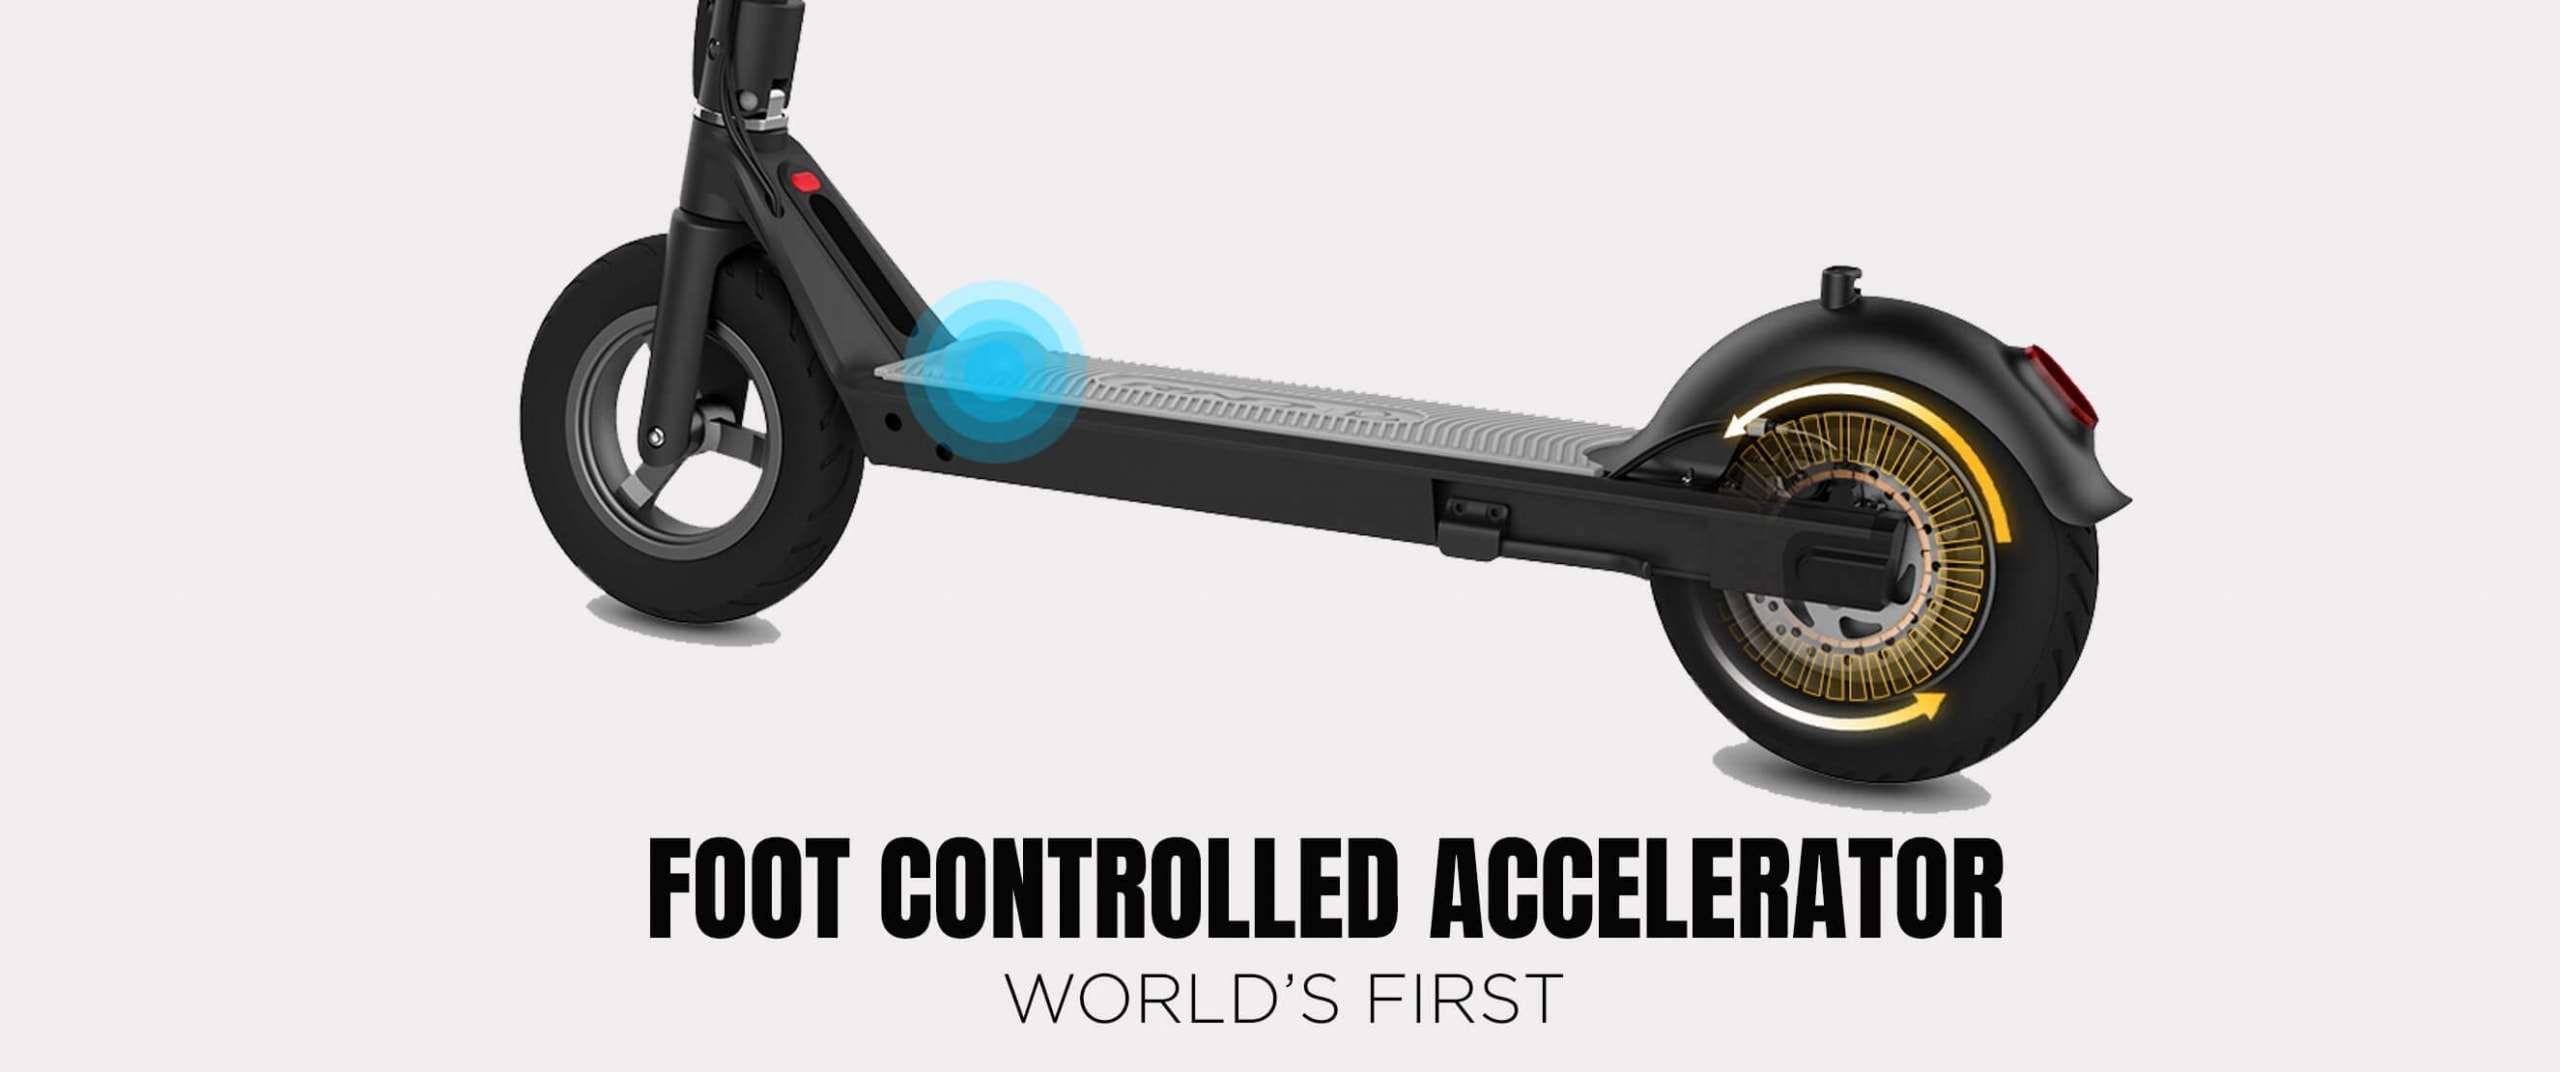 RND F16 (BLACK5.2AH) UL2272 certified e-scooter foot controlled accelerator